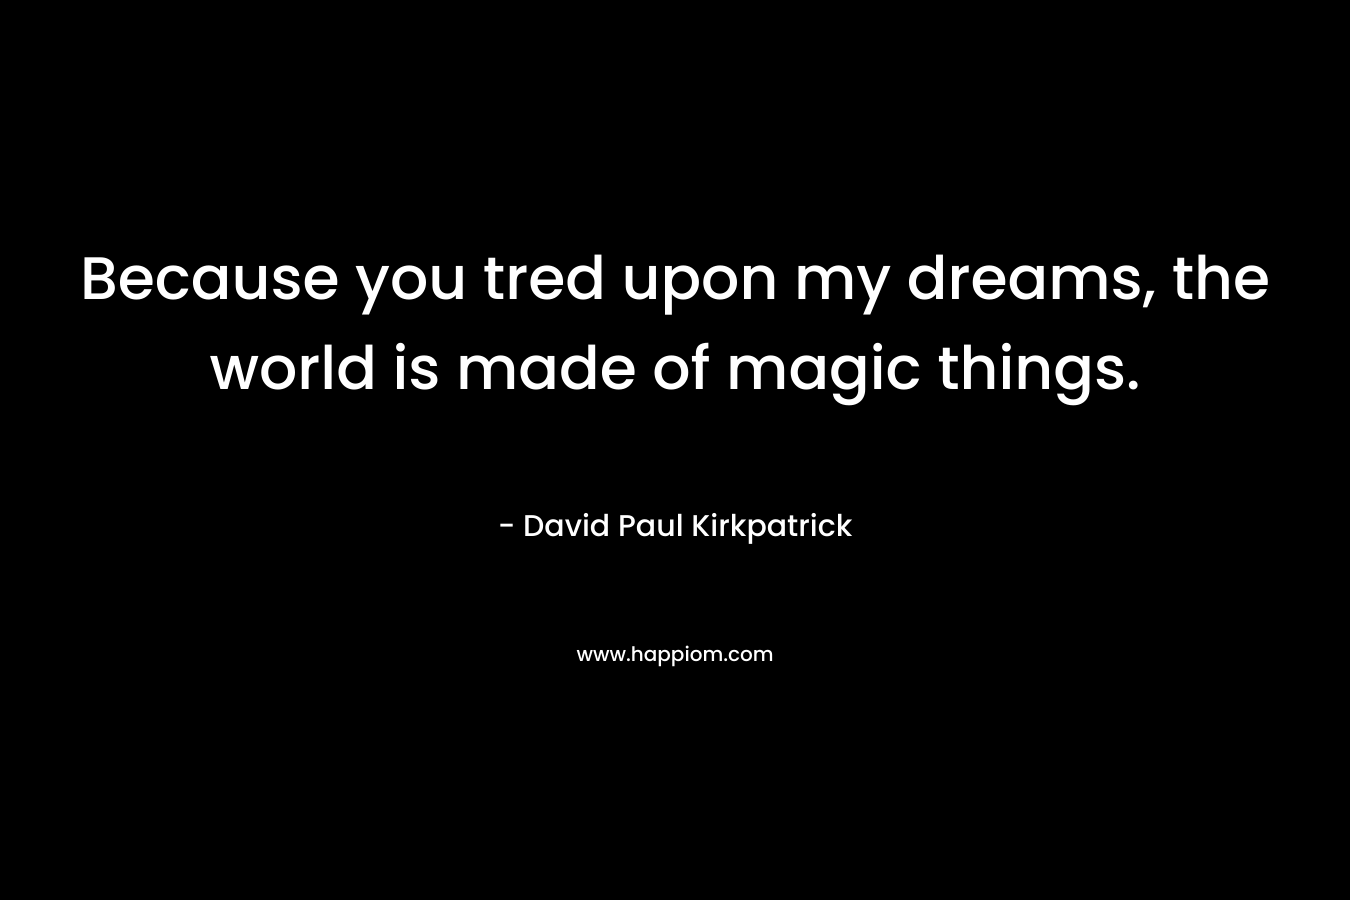 Because you tred upon my dreams, the world is made of magic things.